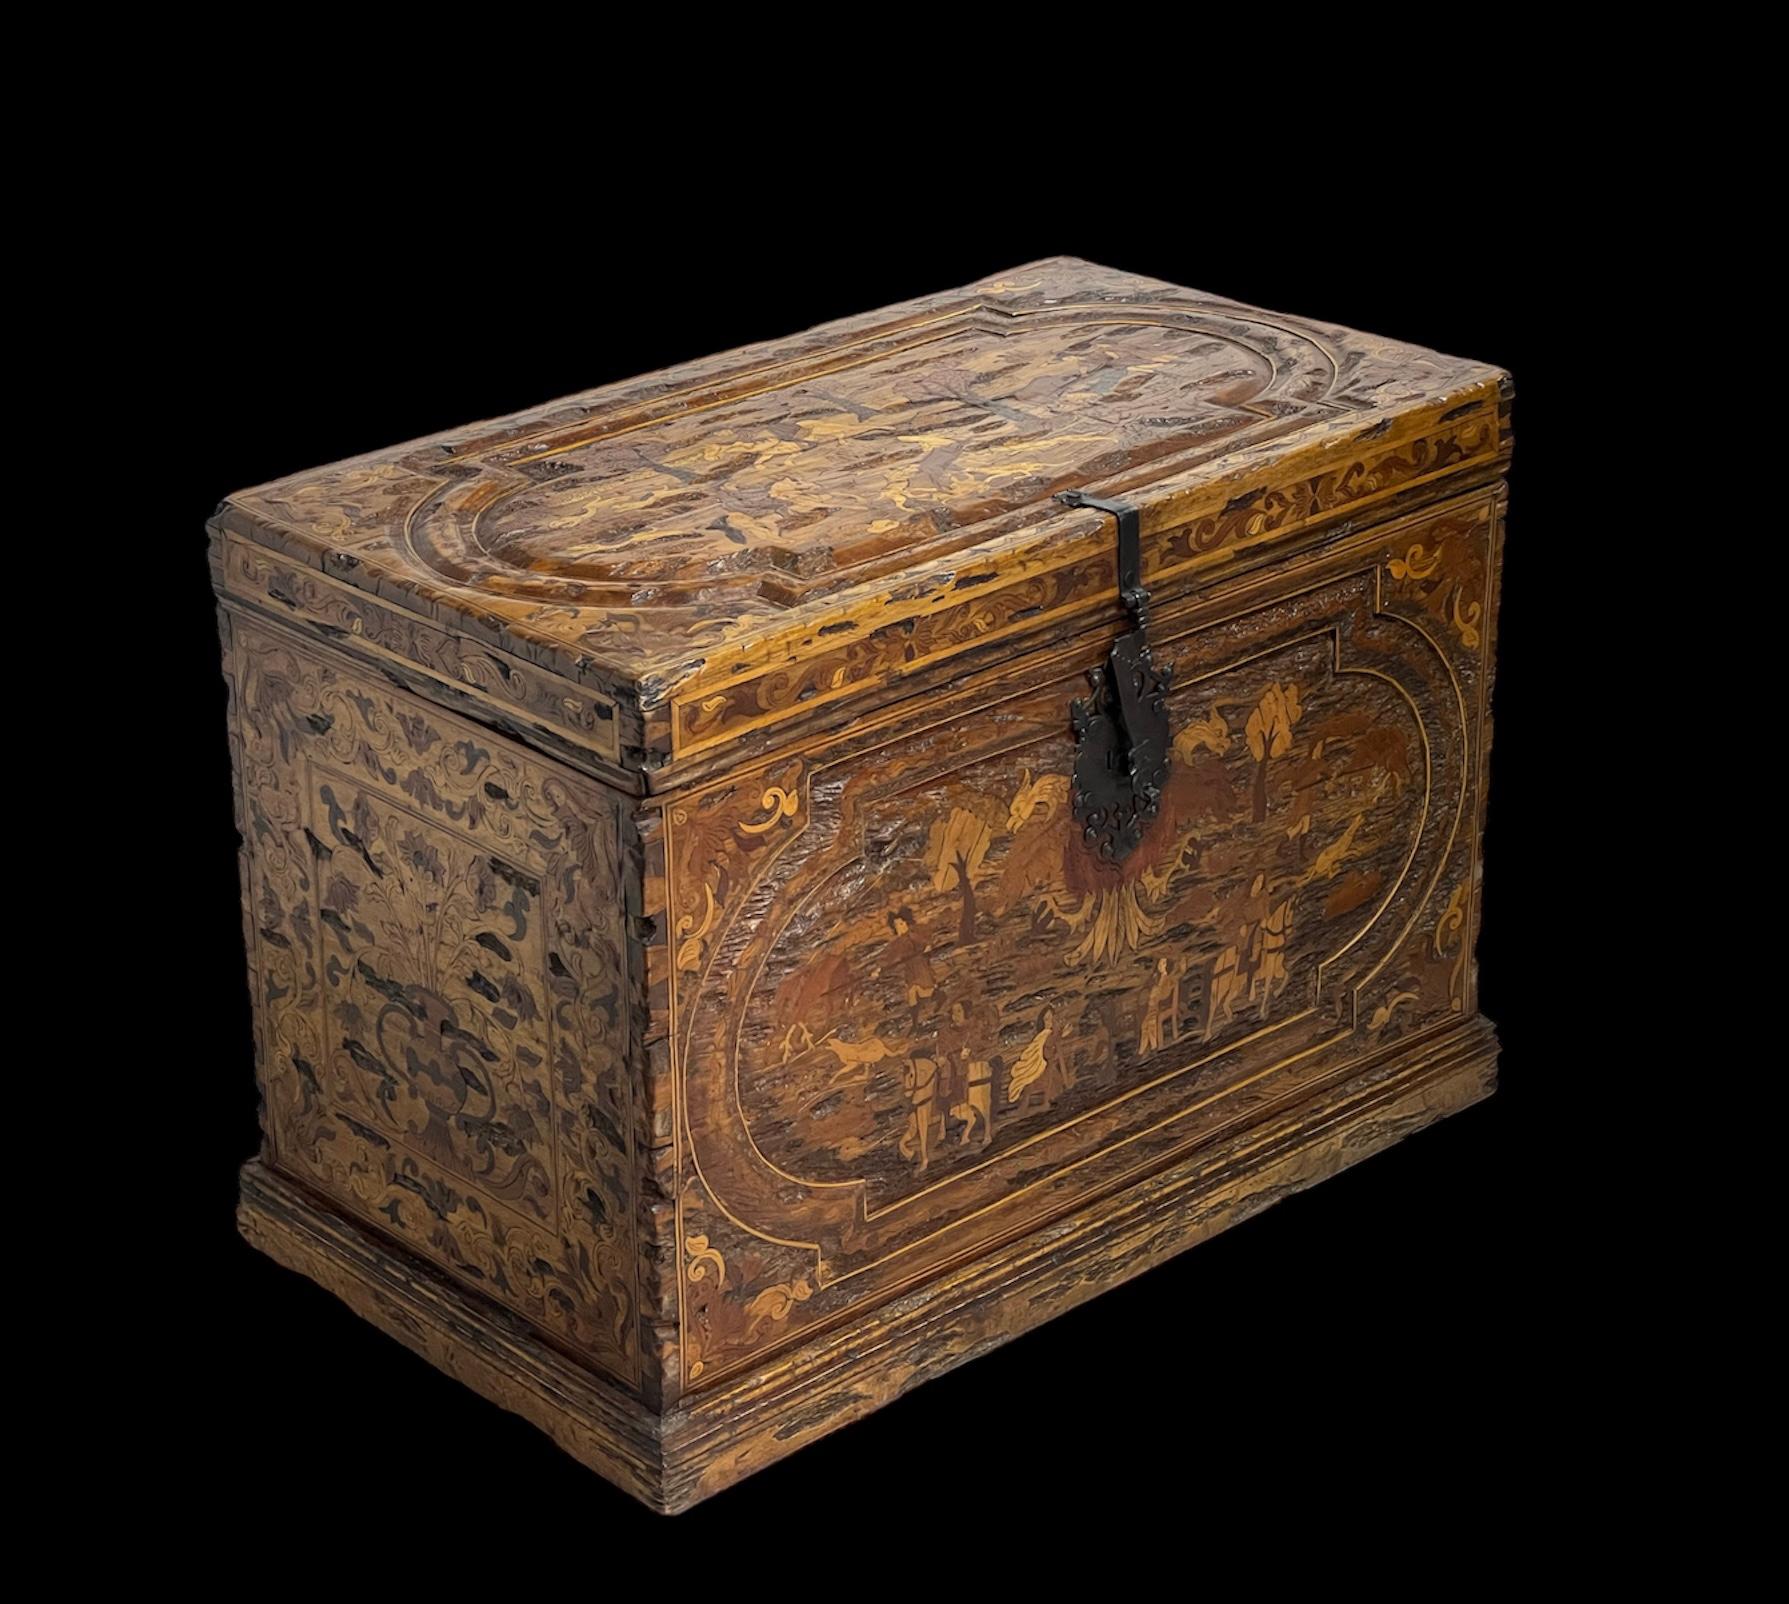 It is a very beautiful trunk from the Mexican colonial style, made in detail by hand. In person you can see in detail the different figures that give great value to this trunk, the color of the wood and the materials makes it unique.